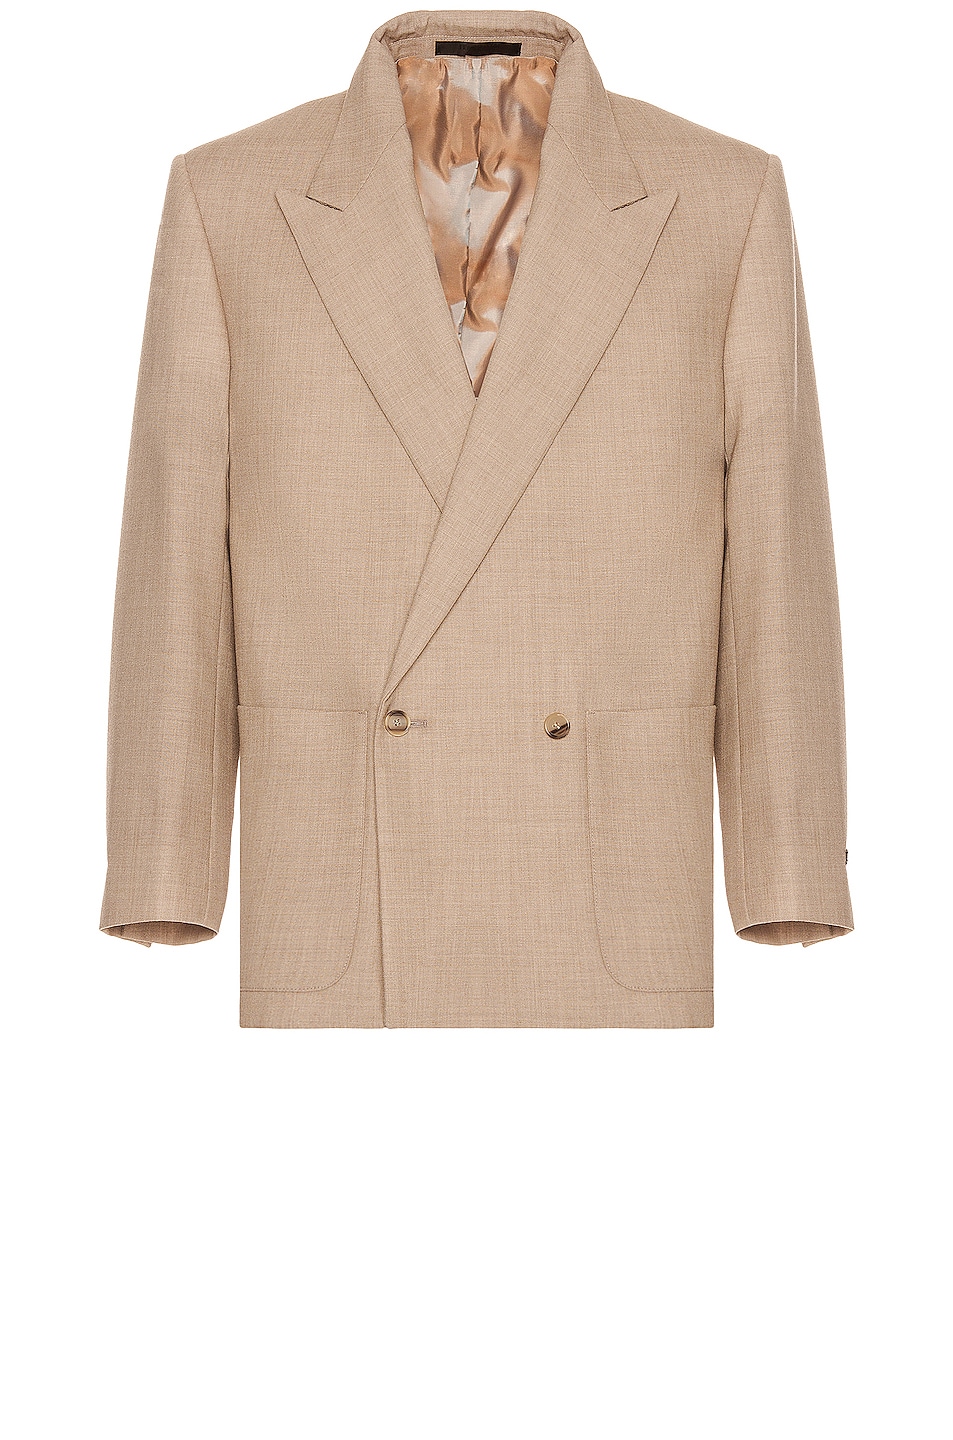 Image 1 of Fear of God The Suit Jacket in Beige